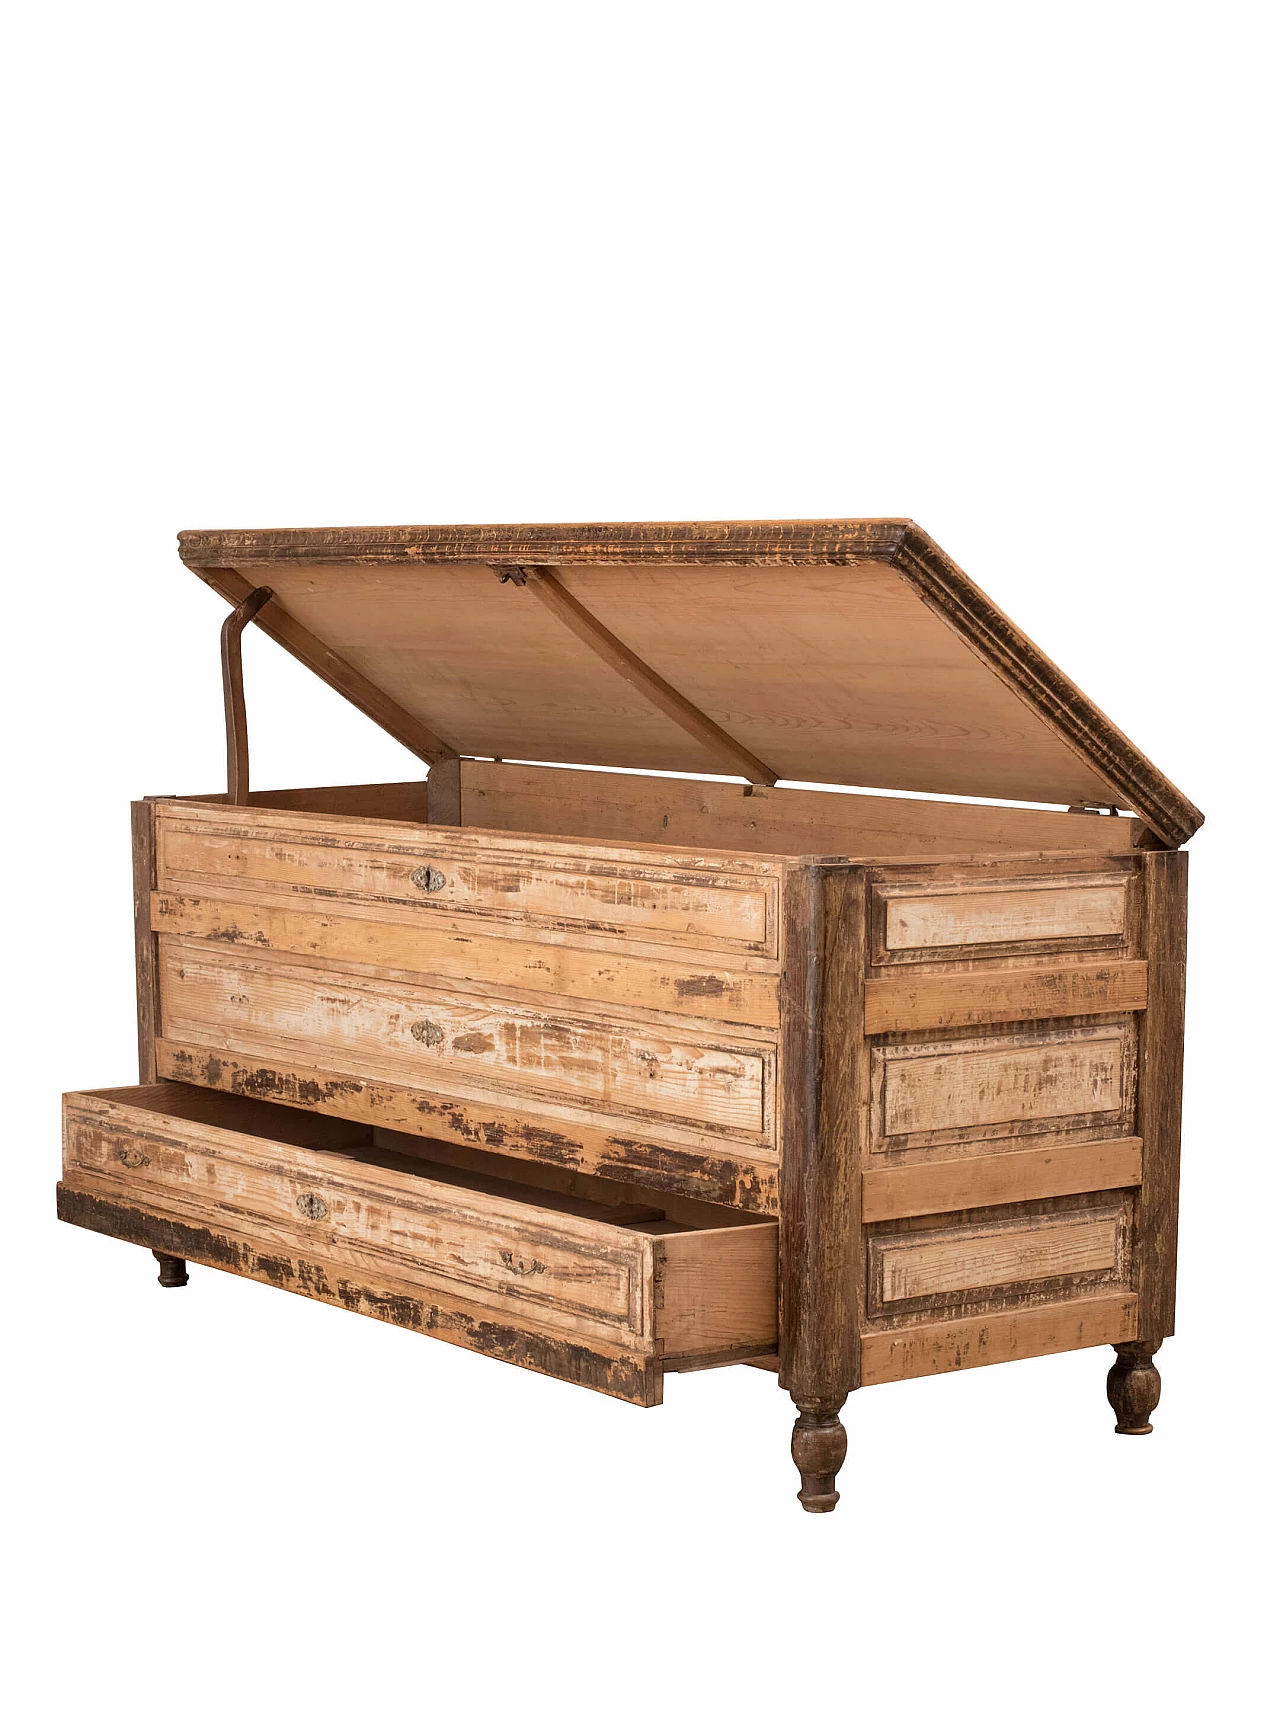 Martinese chest, in fir wood with a drawer 1084670